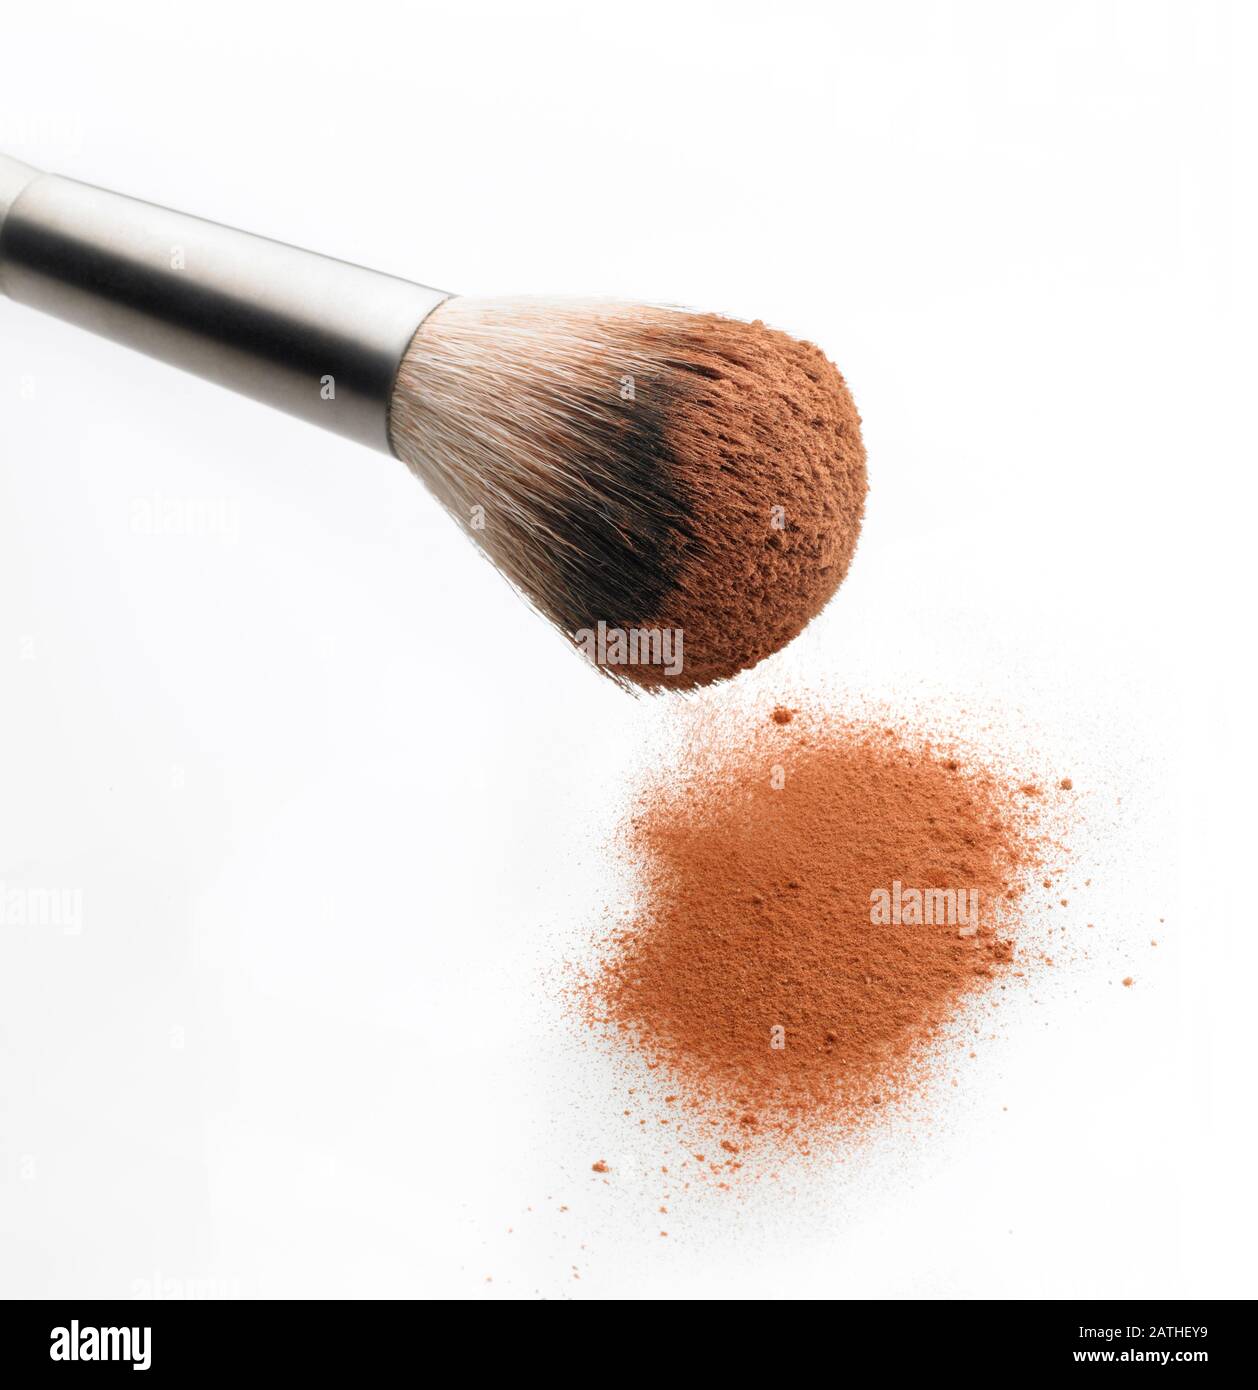 Close Up view of brush removing makeup powder from a pile. White background. Stock Photo